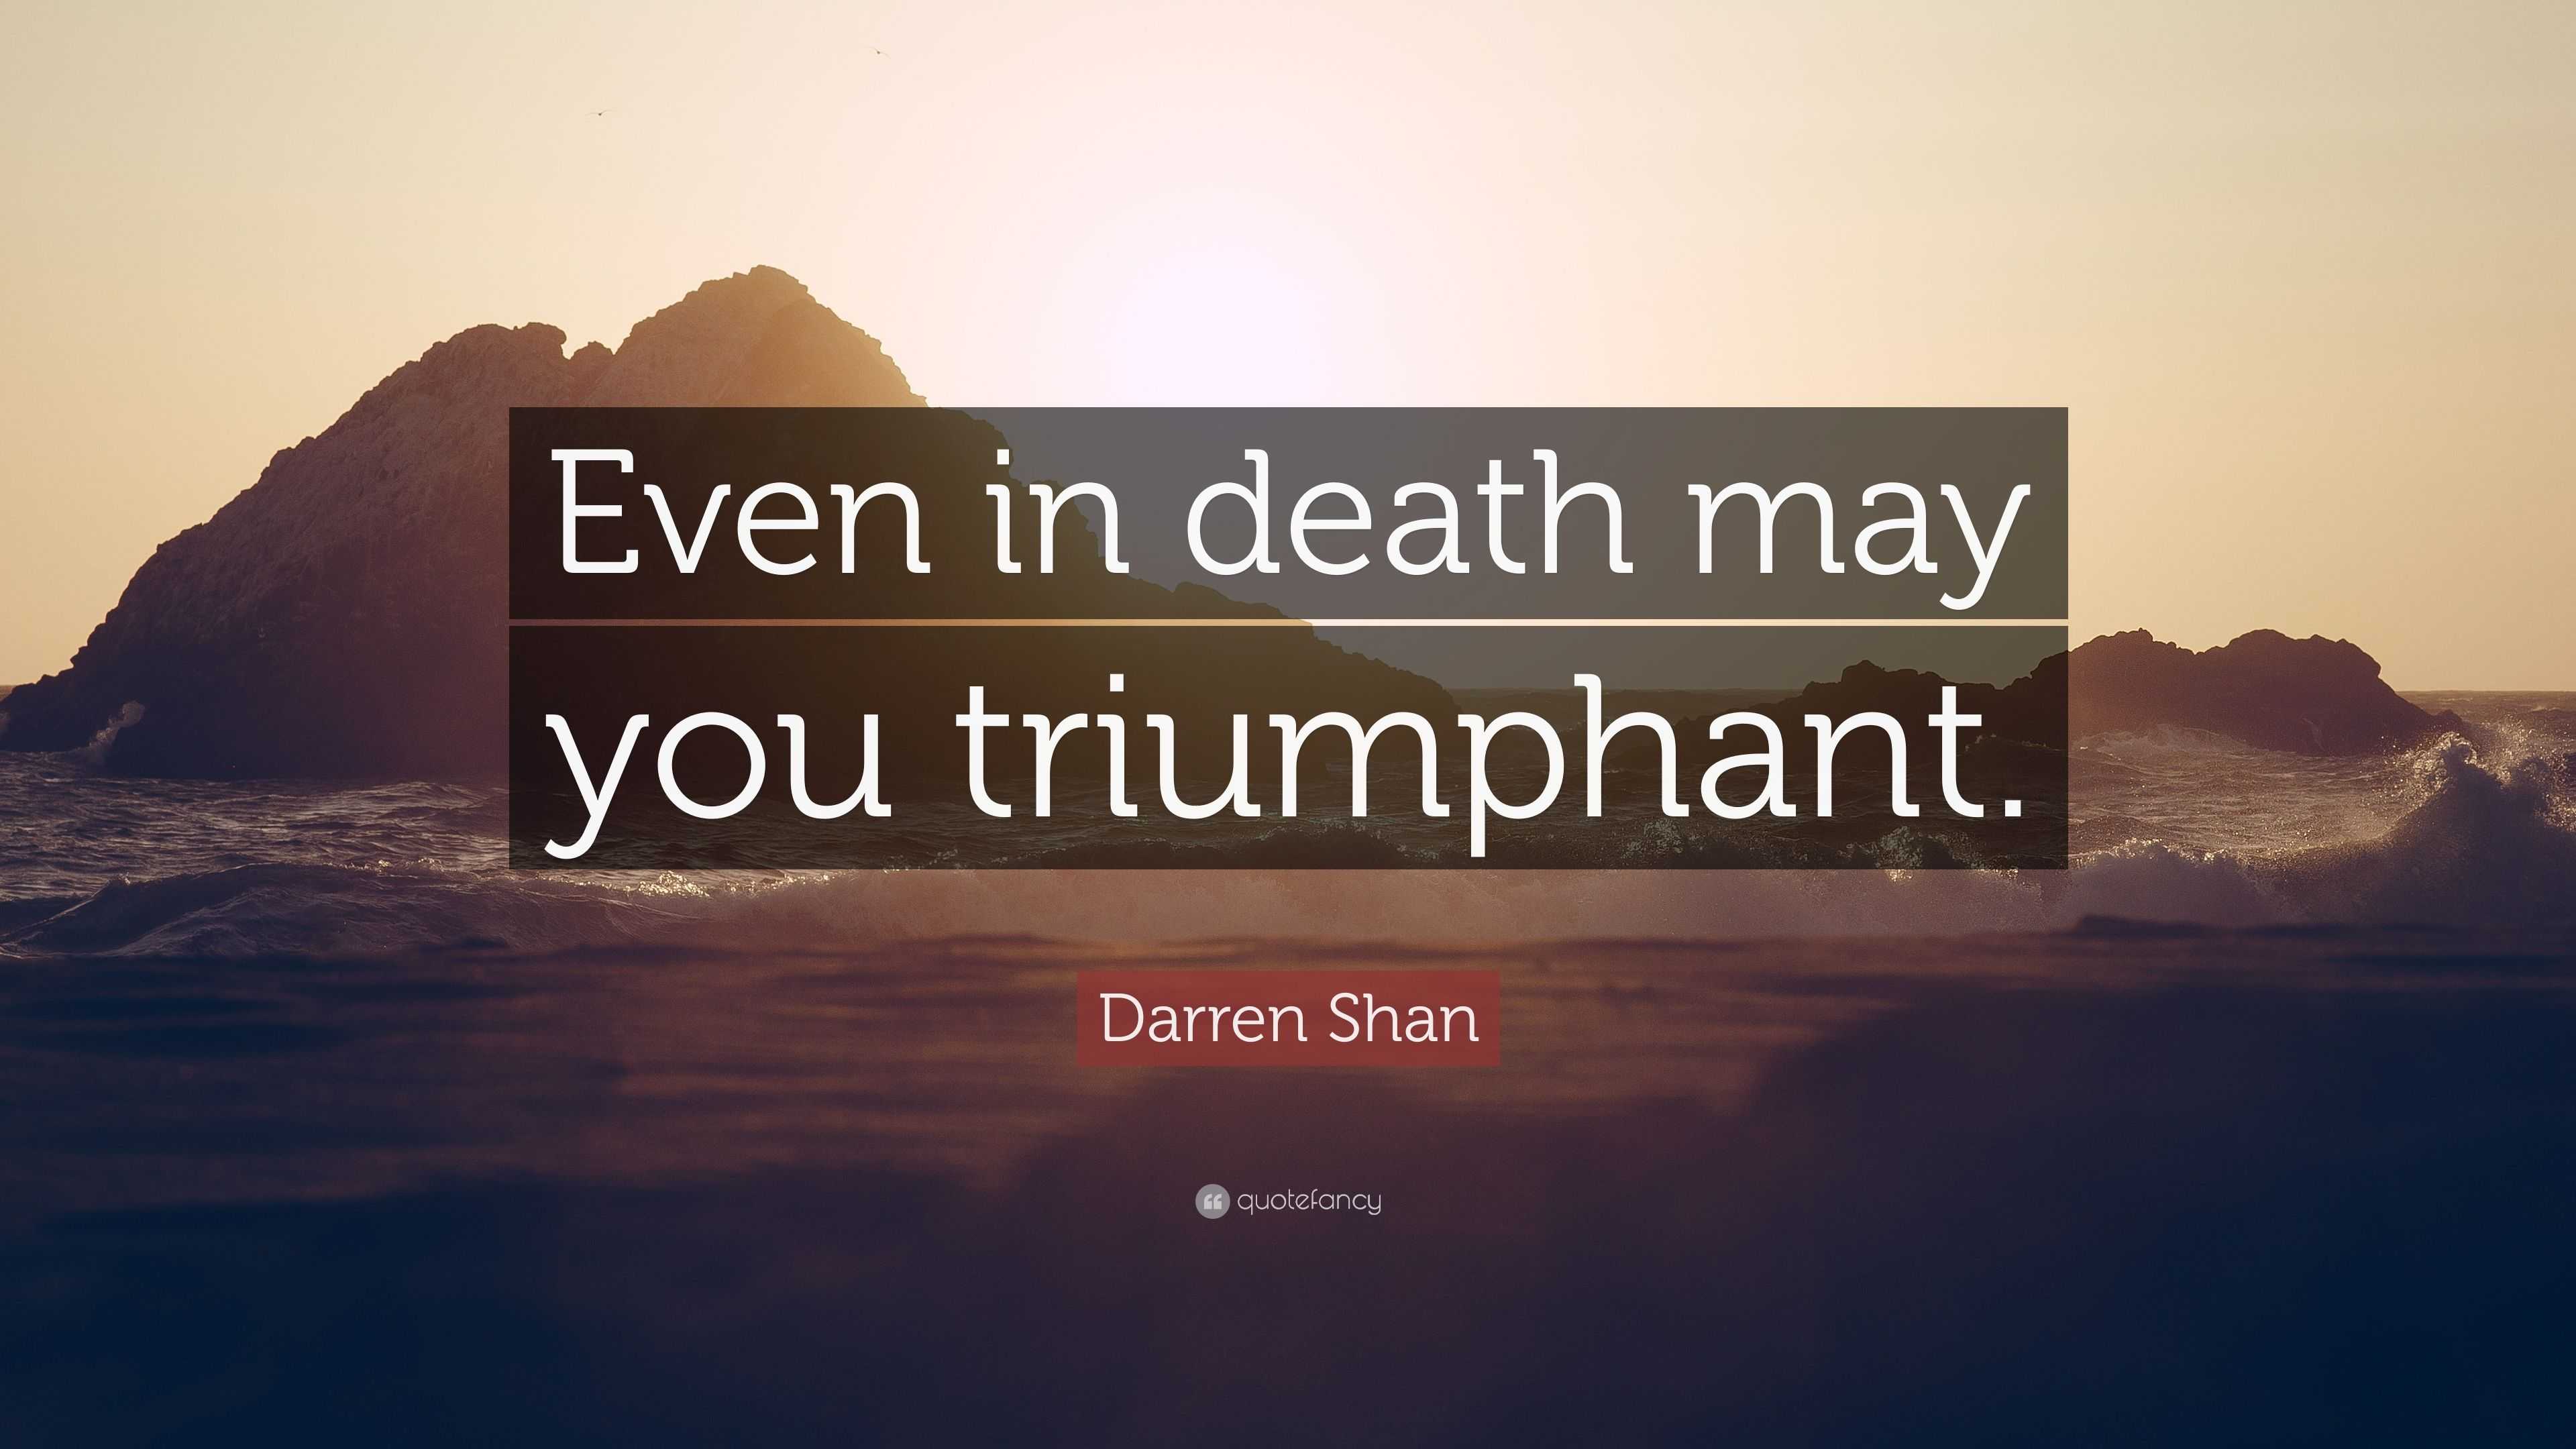 Darren Shan Quote: “Even in death may you triumphant.”